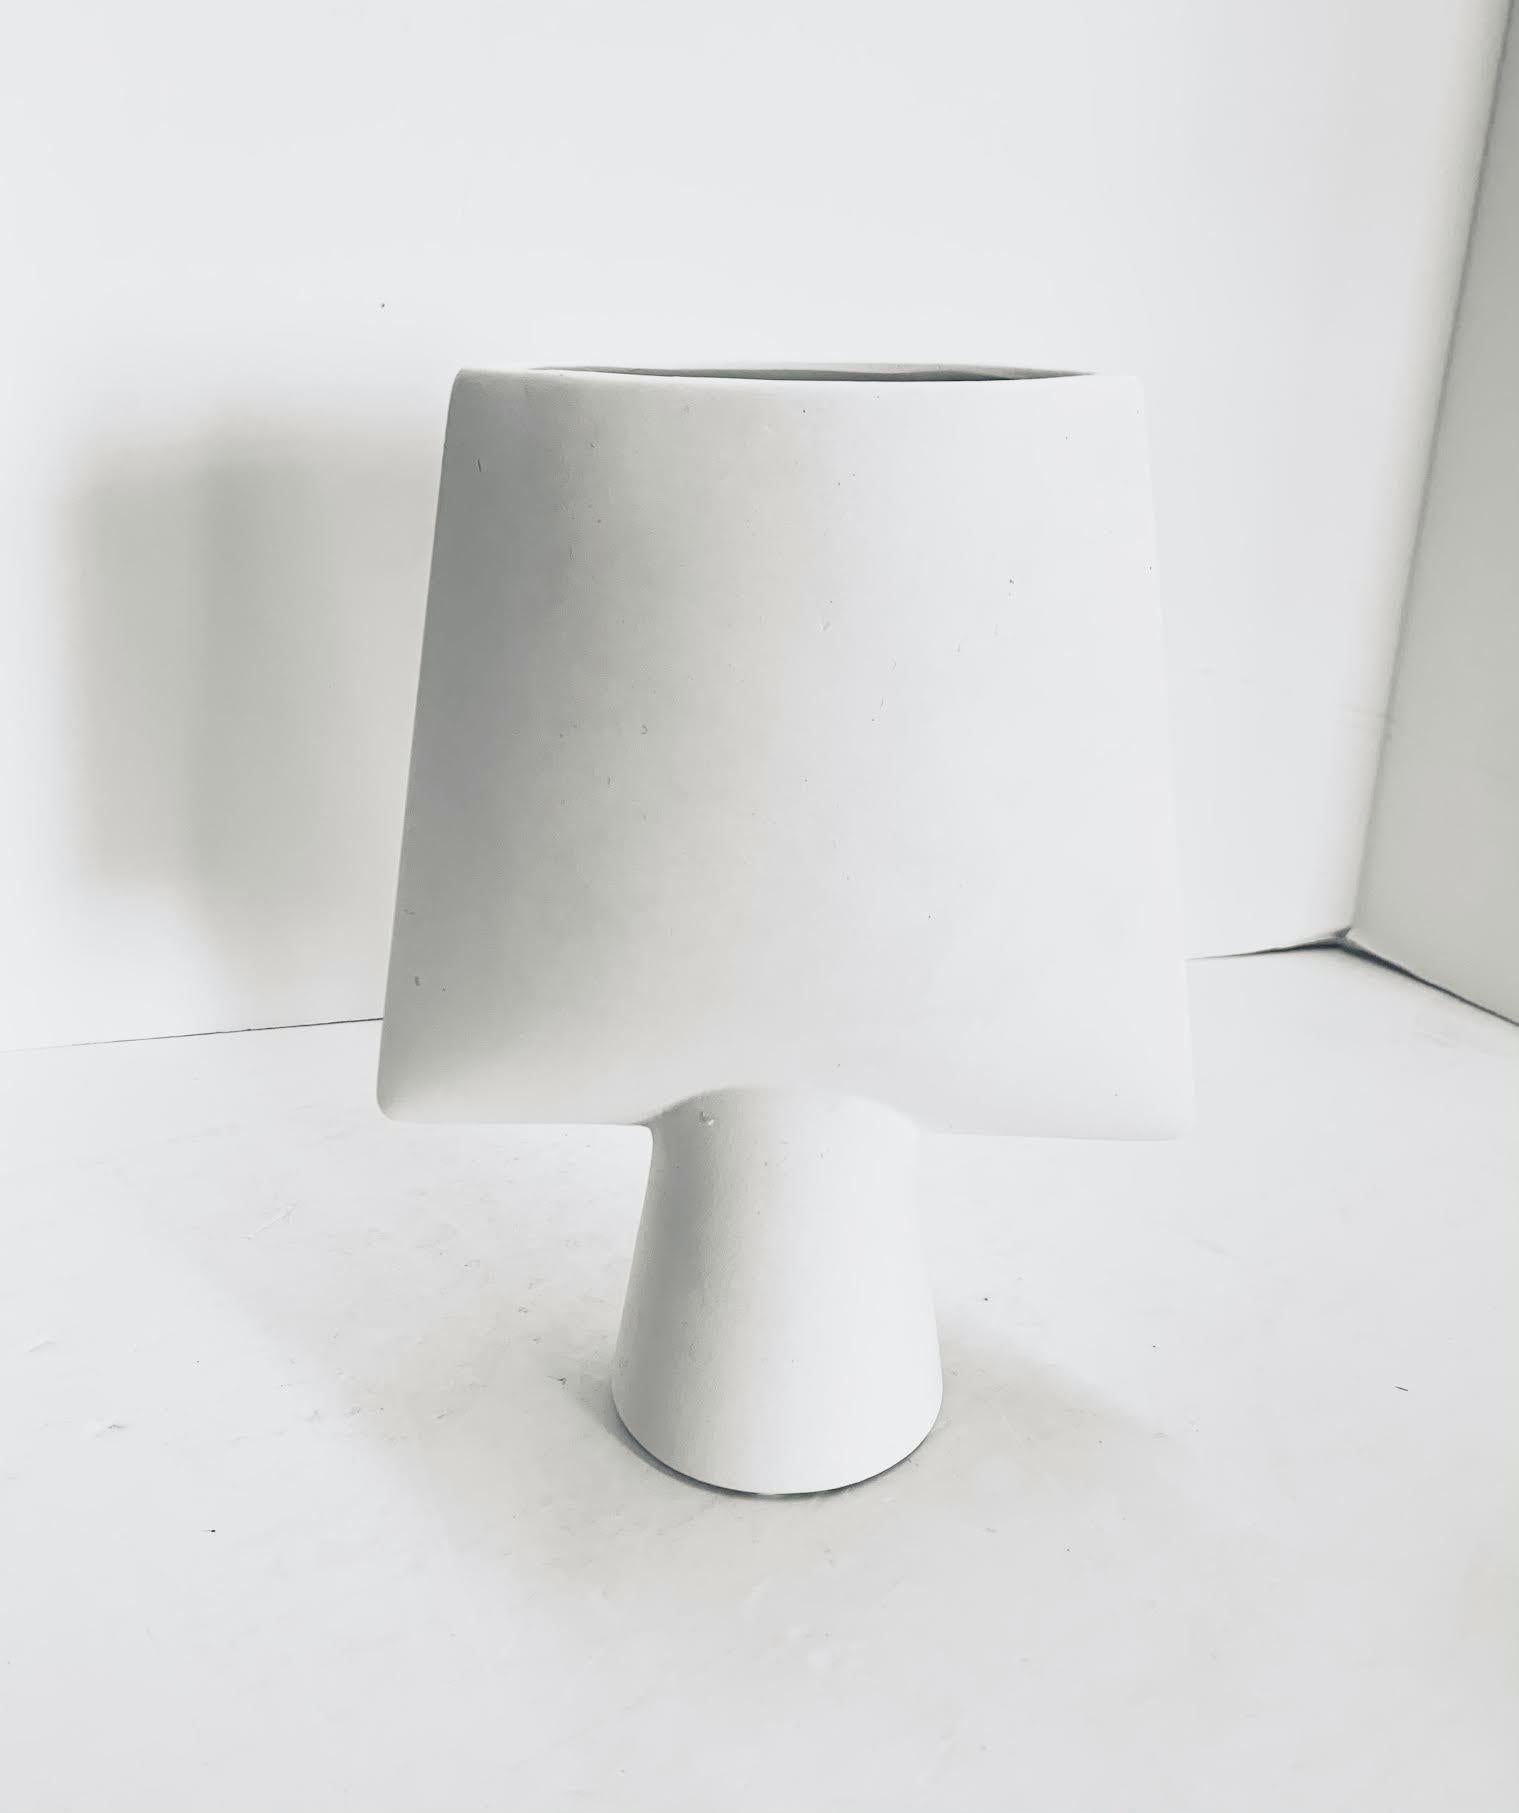 Contemporary Danish design arrow shape vase.
Smooth white finish.
Part of a very large collection.